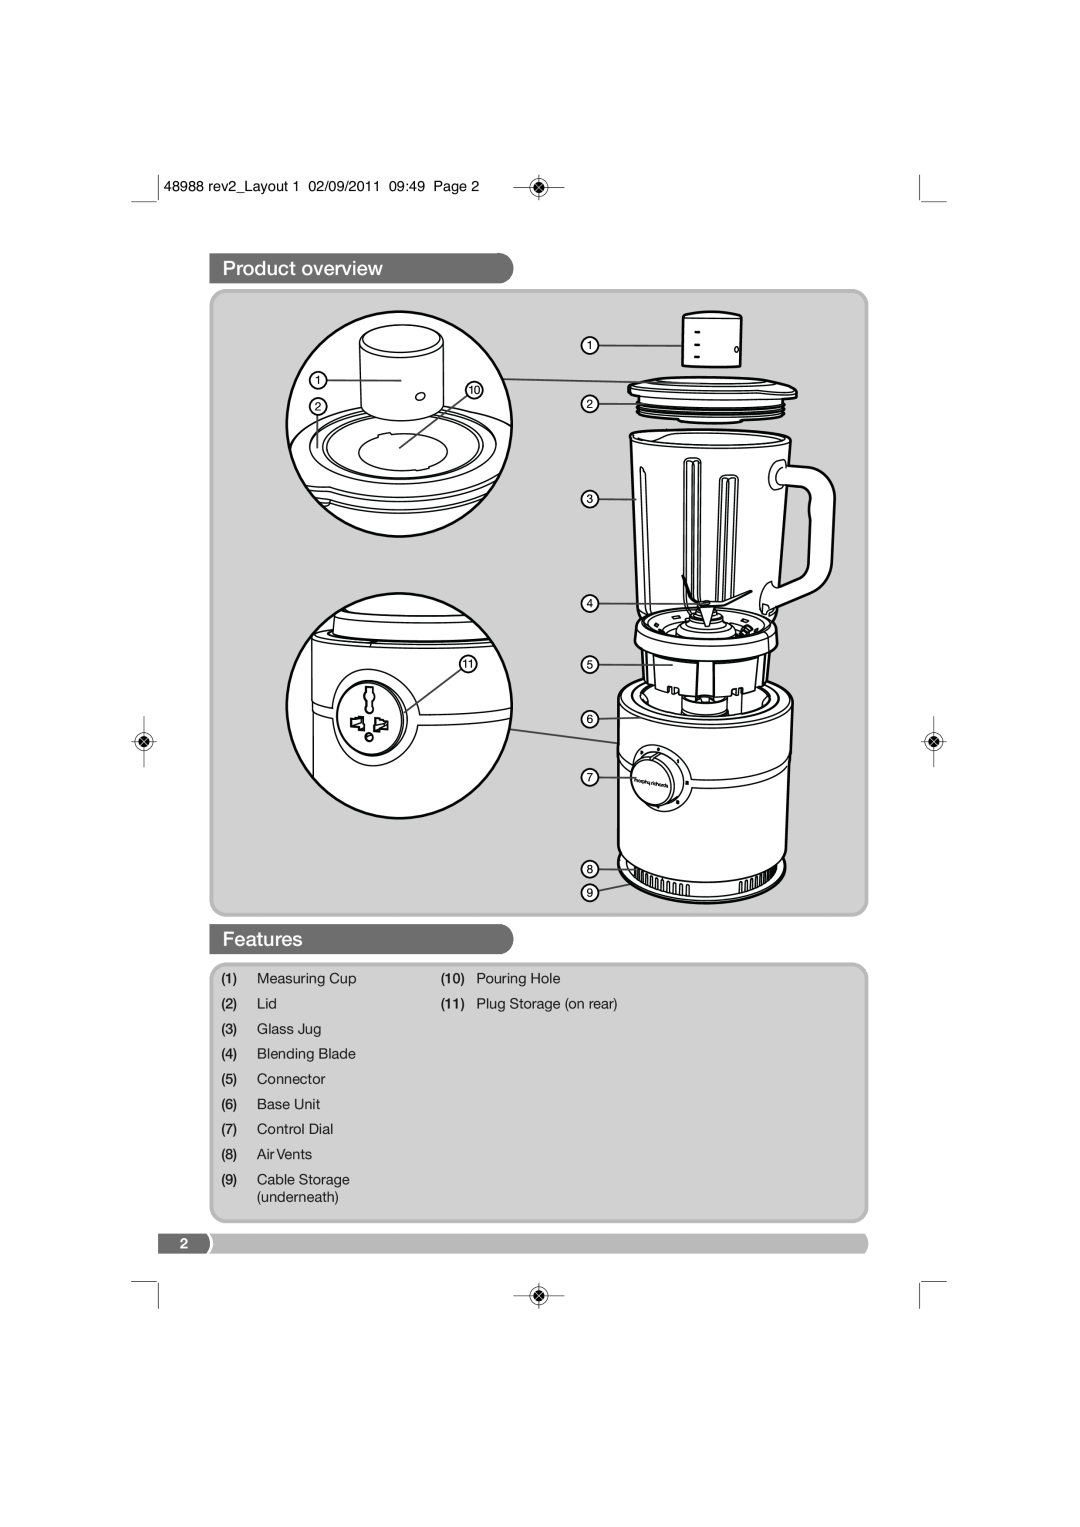 Morphy Richards FP48988 Product overview, Features, 48988 rev2Layout 1 02/09/2011 0949 Page, Measuring Cup, Pouring Hole 